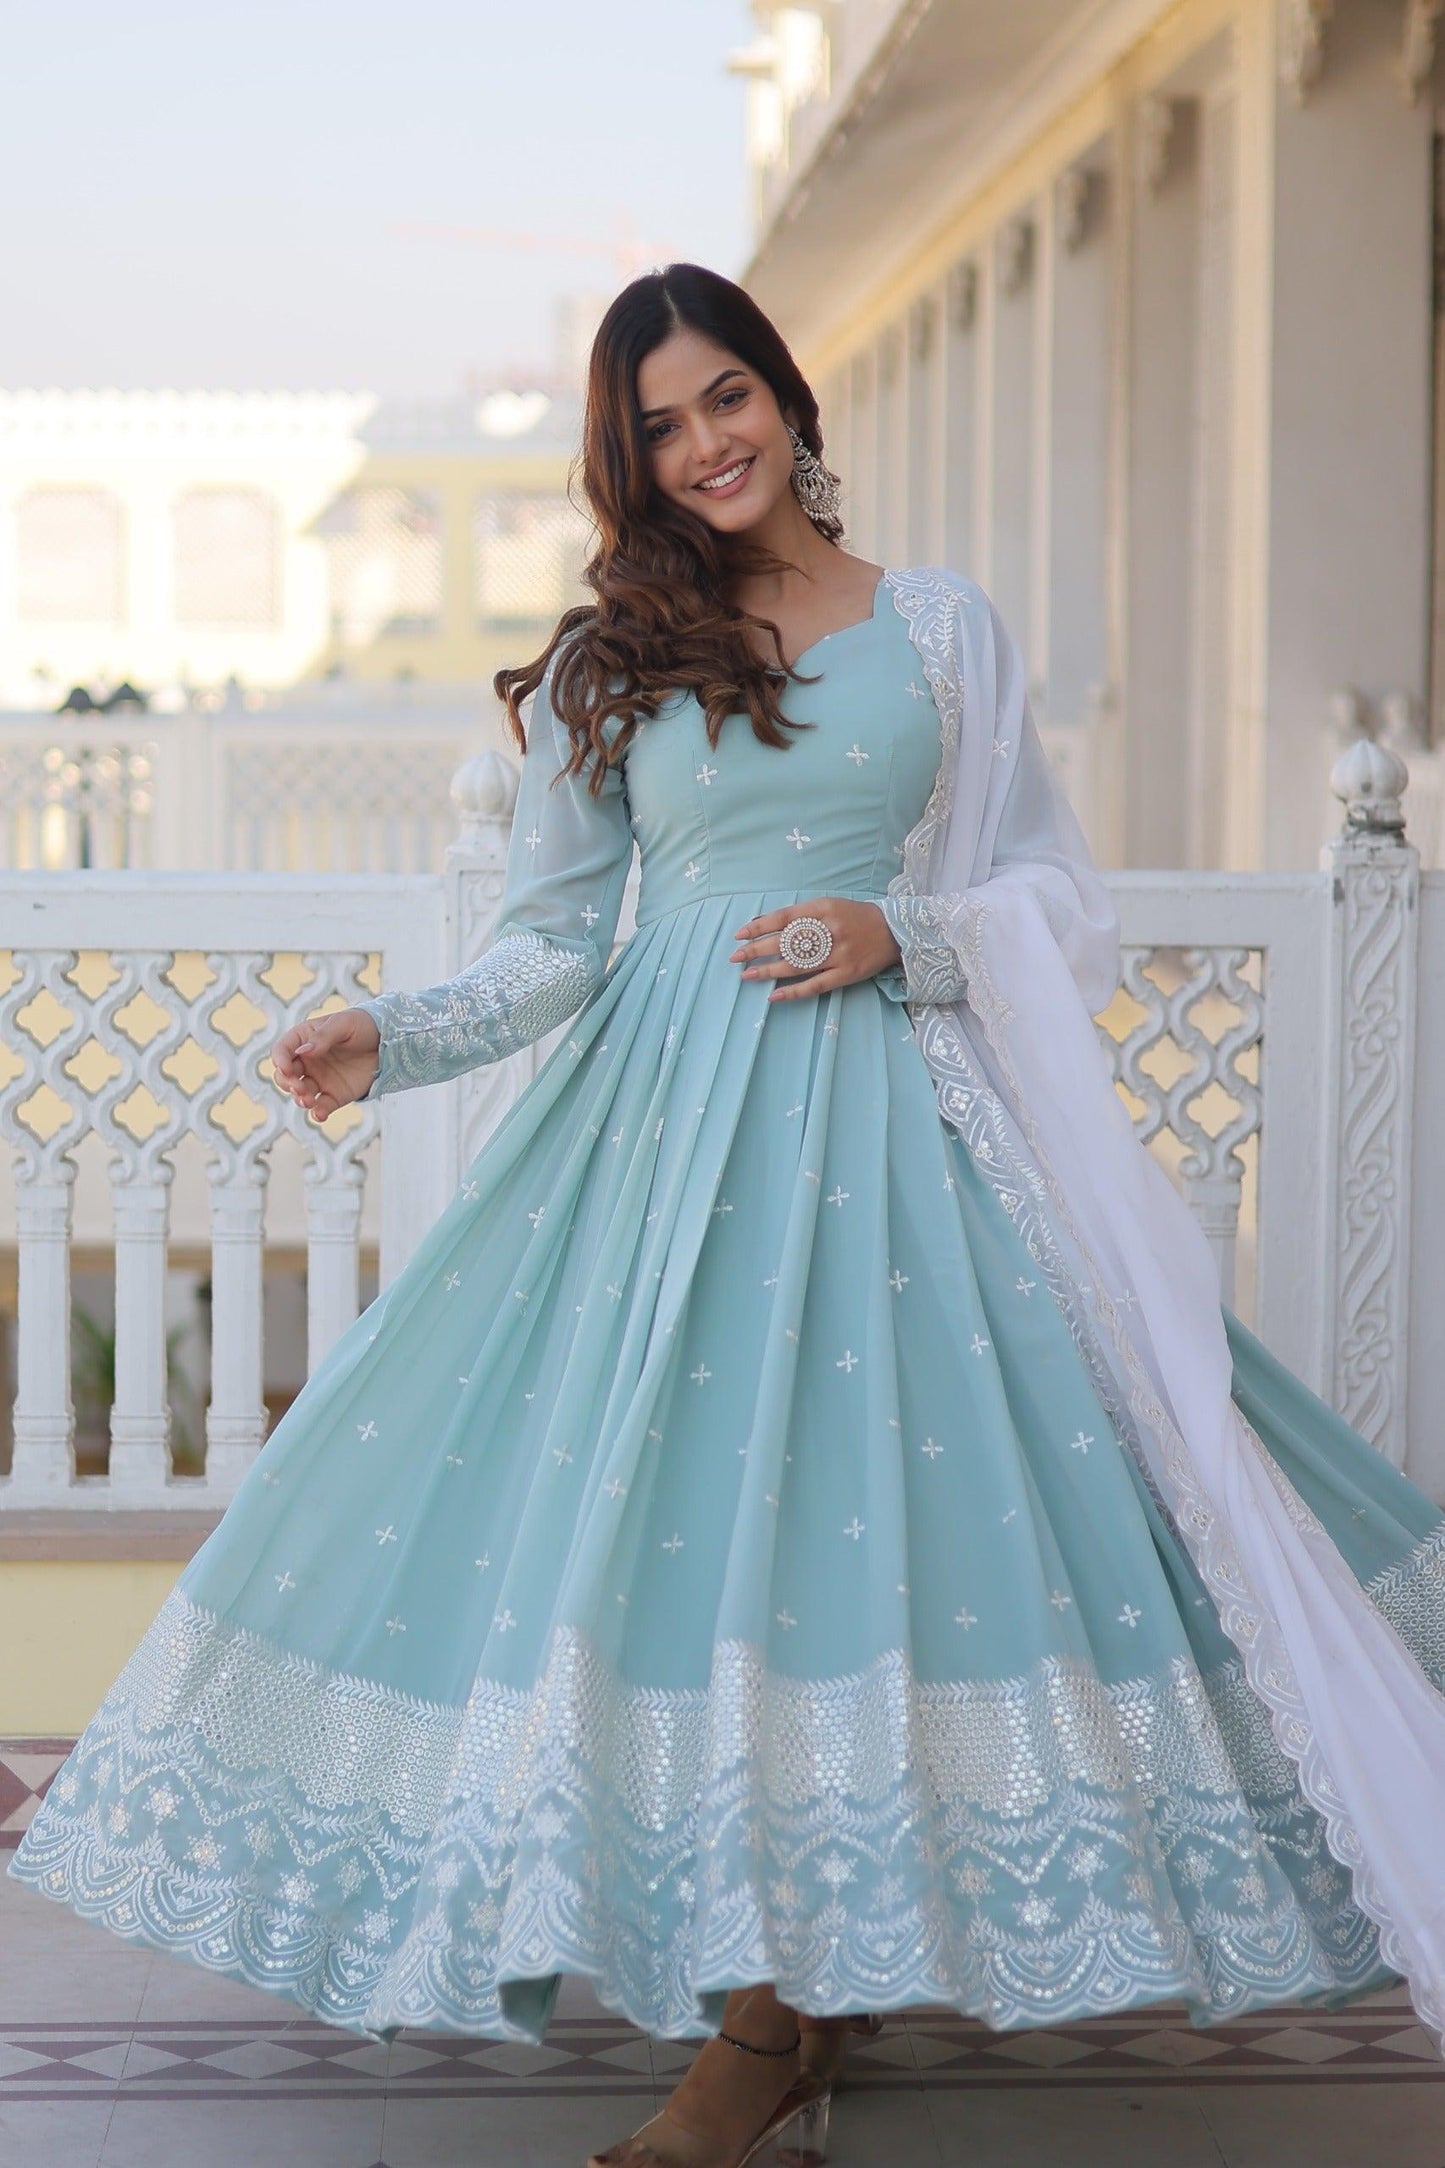 Serenade in Blue: Light Blue Faux Georgette Suit with Exquisite Thread and Sequins Embroidery - Inayakhan Shop 